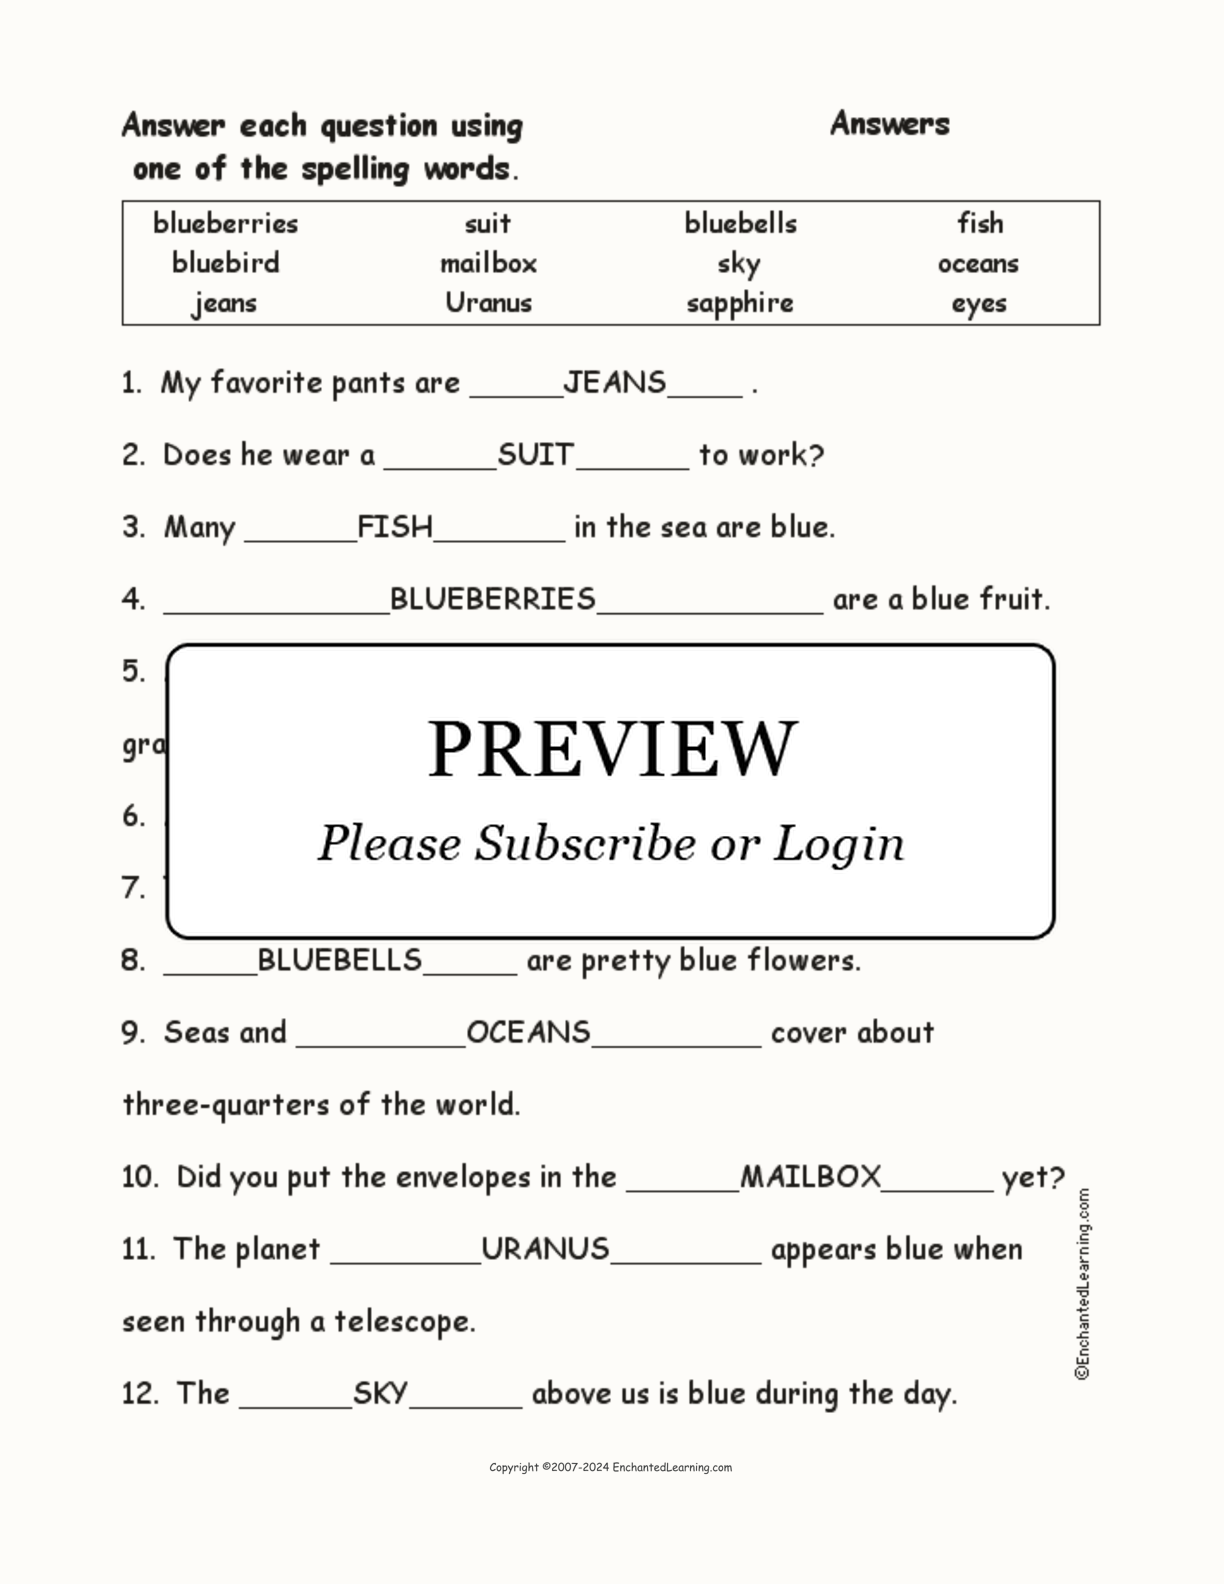 Blue Things: Spelling Word Questions interactive worksheet page 2